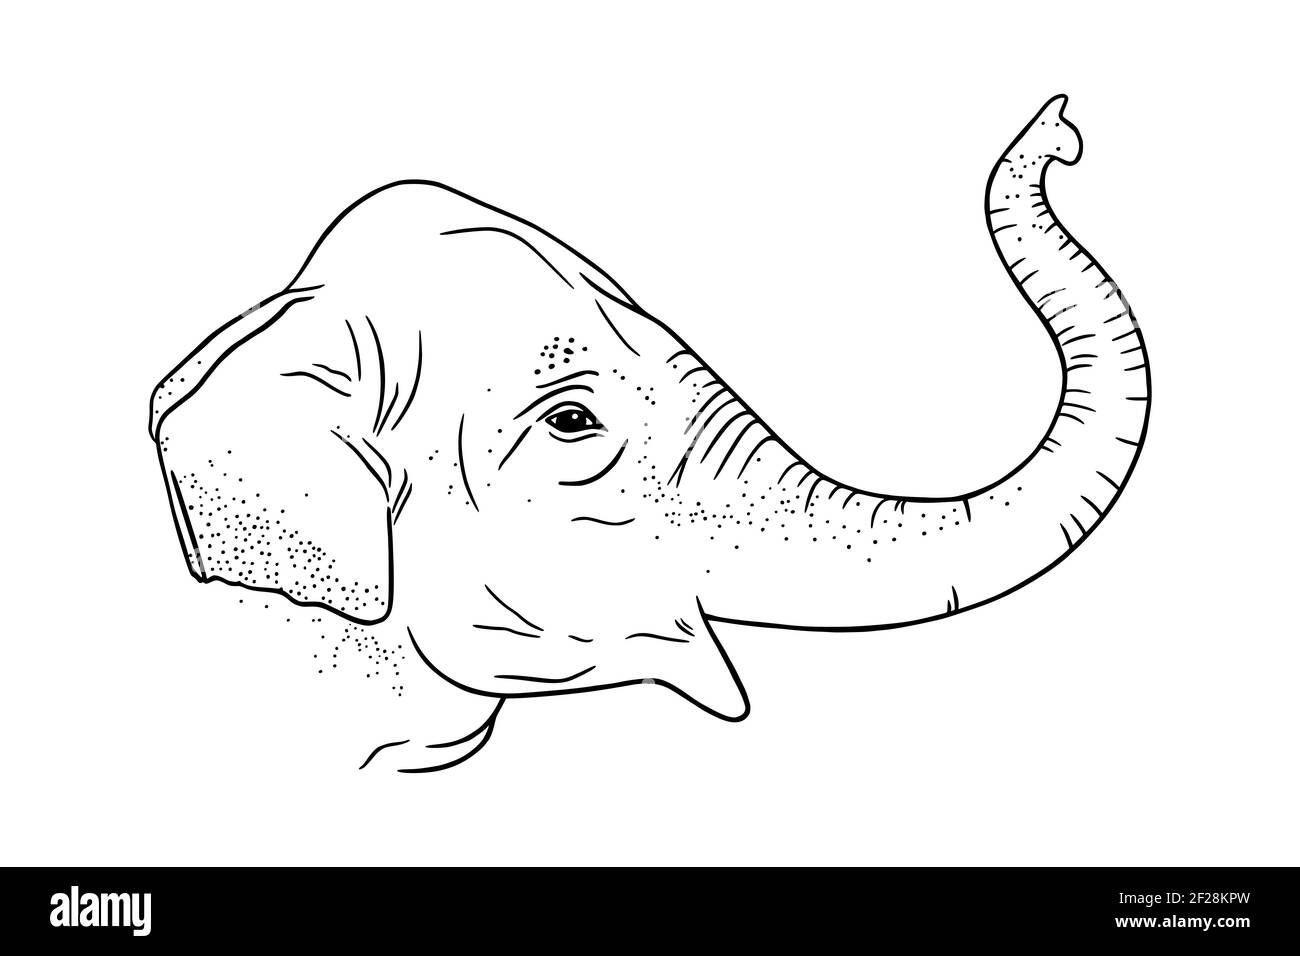 Realistic Elephant Sketch Stock Illustrations  455 Realistic Elephant  Sketch Stock Illustrations Vectors  Clipart  Dreamstime